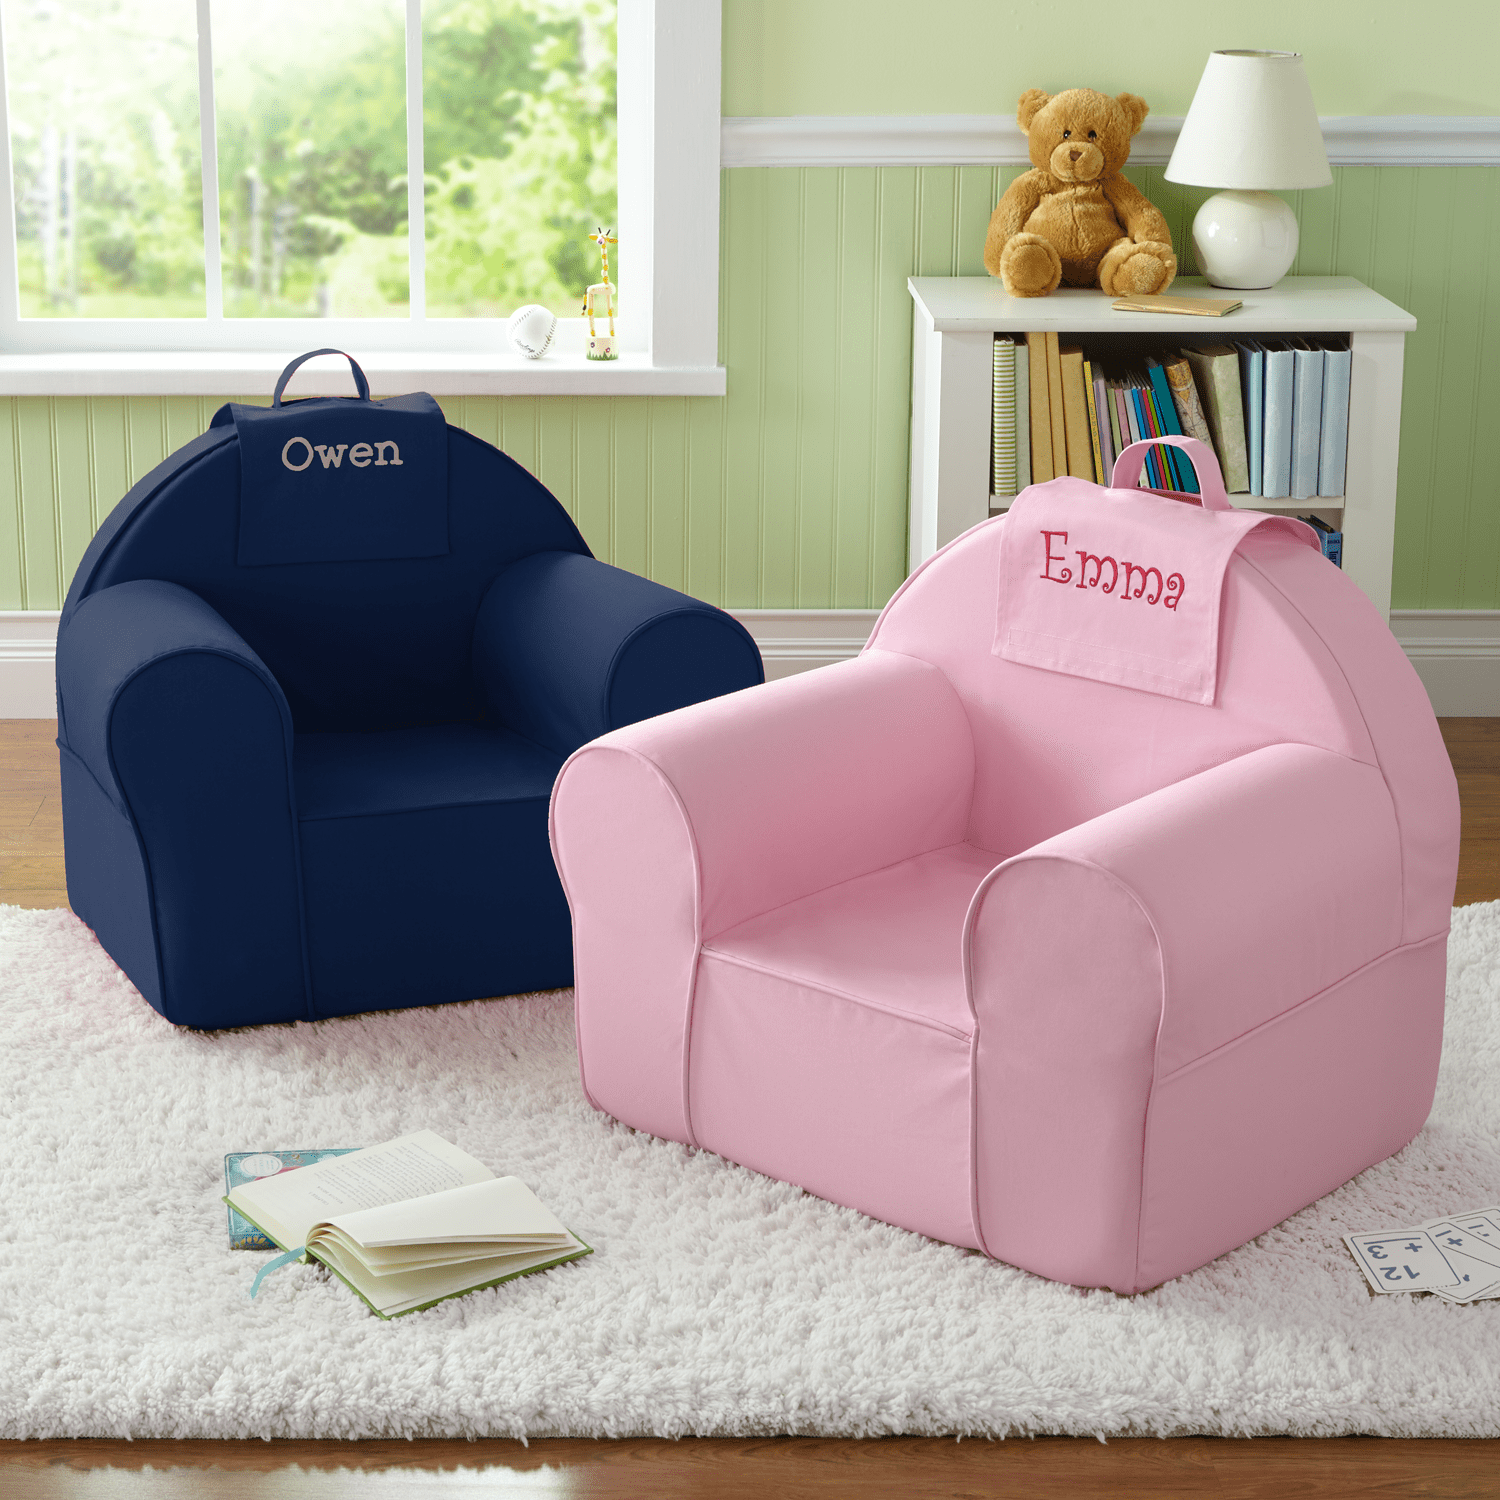 personalized child chair